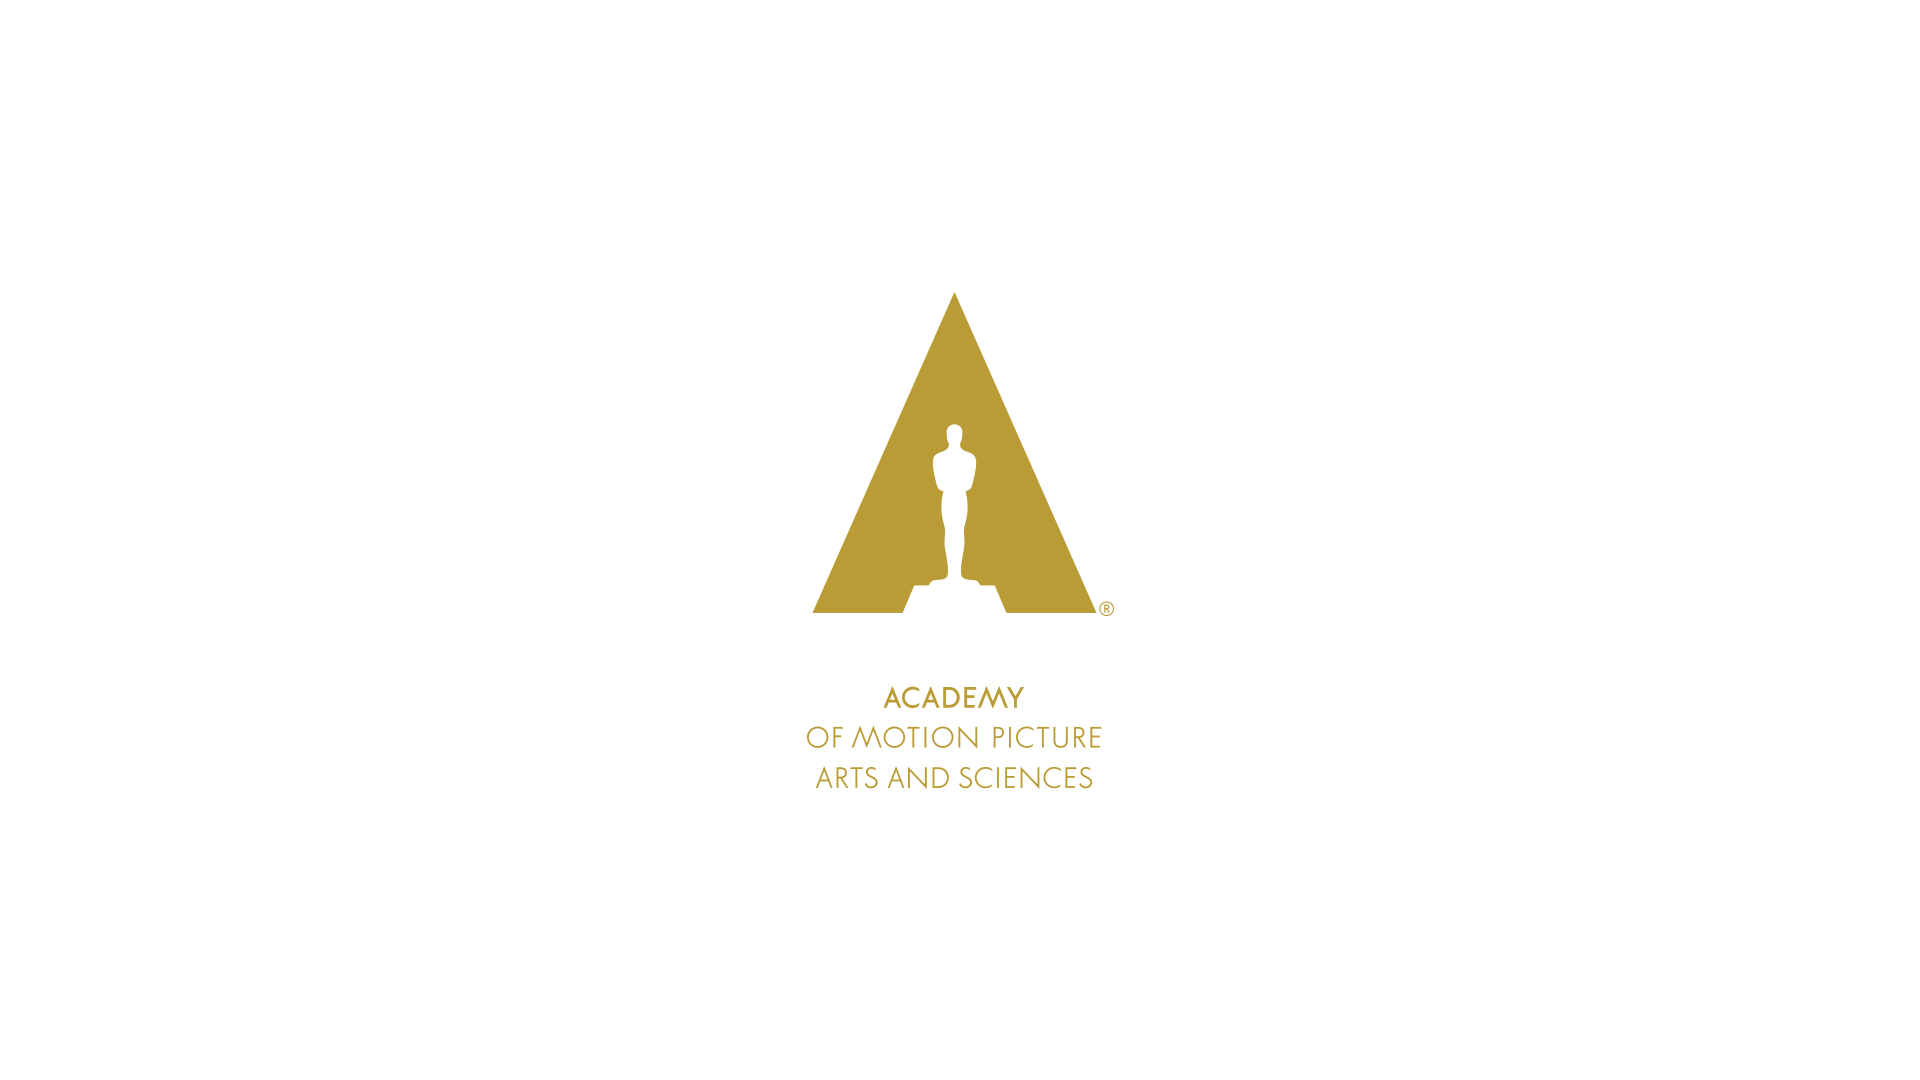 THE ACADEMY INVESTIGATES 10 SCIENTIFIC AND TECHNICAL AREAS FOR 2023 AWARDS CONSIDERATION